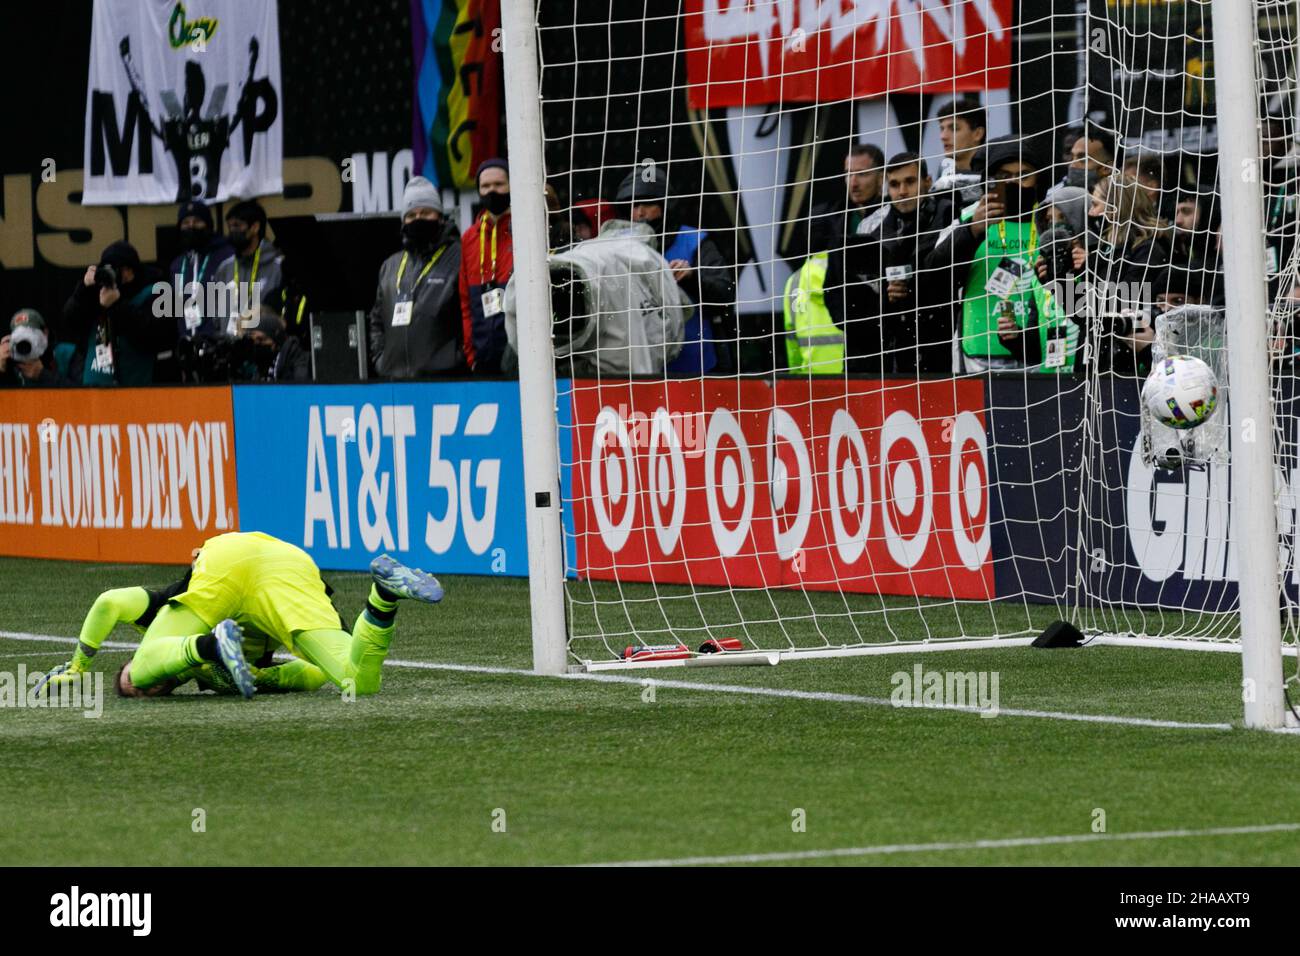 Portland, USA. 11th Dec, 2021. Goaltender Steve Clark misses the final kick of the shootout, as the New York City Football Club defeated the Portland Timbers 4-2 on a penalty kick shootout, after playing to a 1-1 tie in regular time and overtime, for the Major League Soccer Championship Cup, in Portland, Oregon on December 11, 2021. (Photo by John Rudoff/Sipa USA) Credit: Sipa USA/Alamy Live News Stock Photo